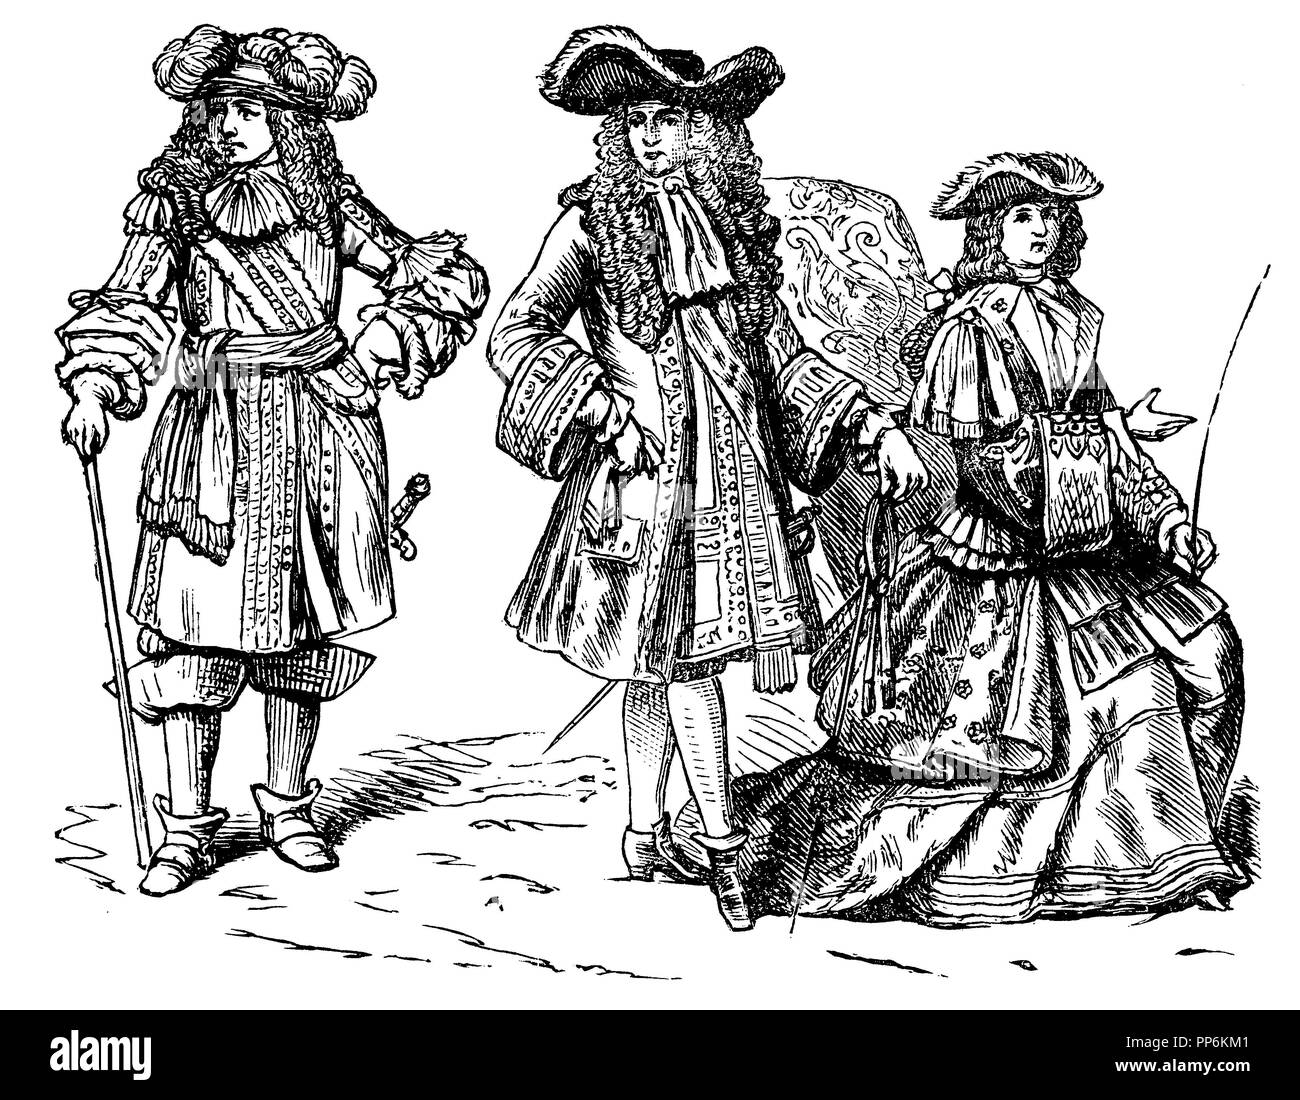 Allongetracht (1650-1720), left: Louis XIV. Since 1670 in warrior costume, middle: Louis XIV. Since 1670, in court dress, right: Elisabeth Charlotte of Orleans in riding dress, anonym  1896 Stock Photo